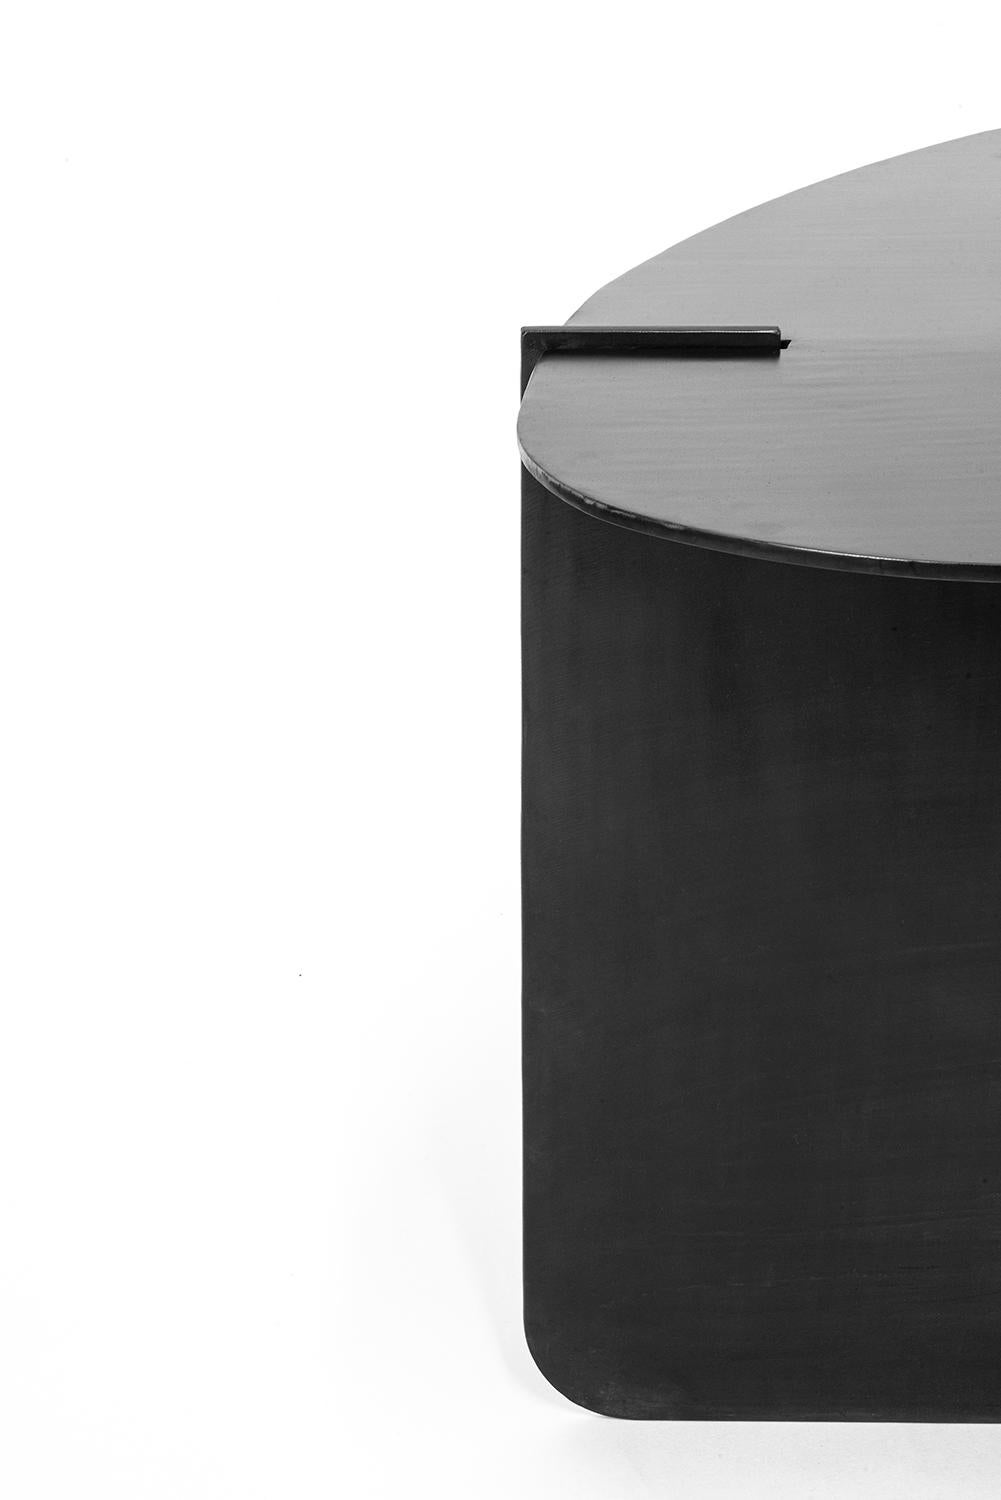 American Circular Office/ Dining Table Organic Black Modern Contemporary Blackened Steel For Sale